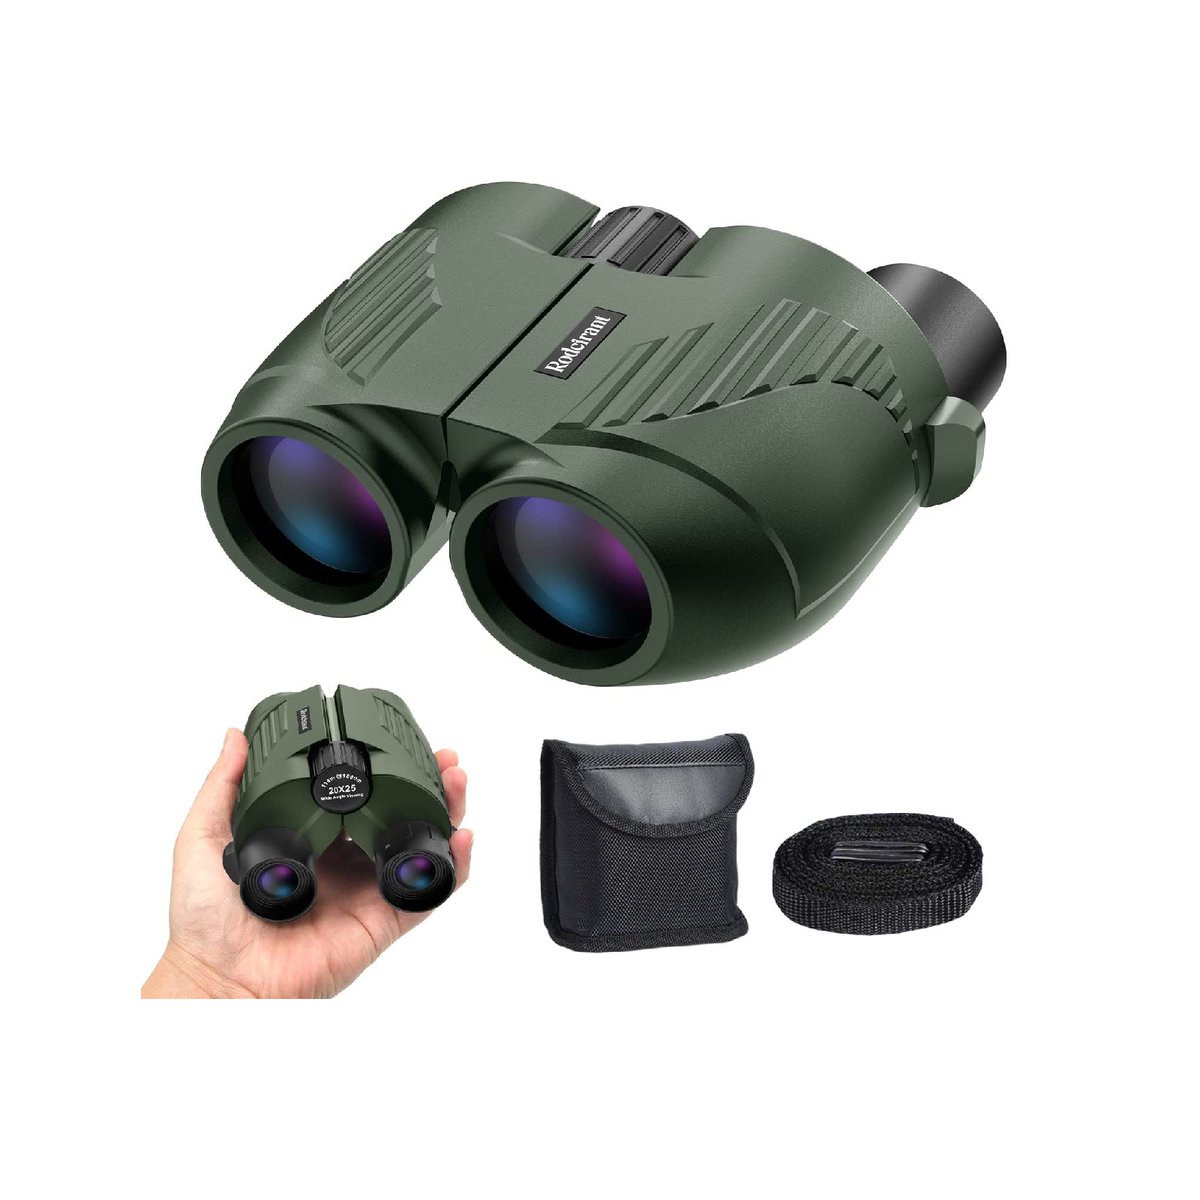 [-80% Off Deal] Hurry: $39.99 (was: $199.99) [Amazon] 20X25 Compact Binoculars for Adults and Kids,Large Eyepiece Waterproof Binocular

amzn.to/3KmXY9d

#binoculars #compactbinoculars #waterproofbinoculars #outdooractivities #birdwatching #wildlifeobservation #travelgear